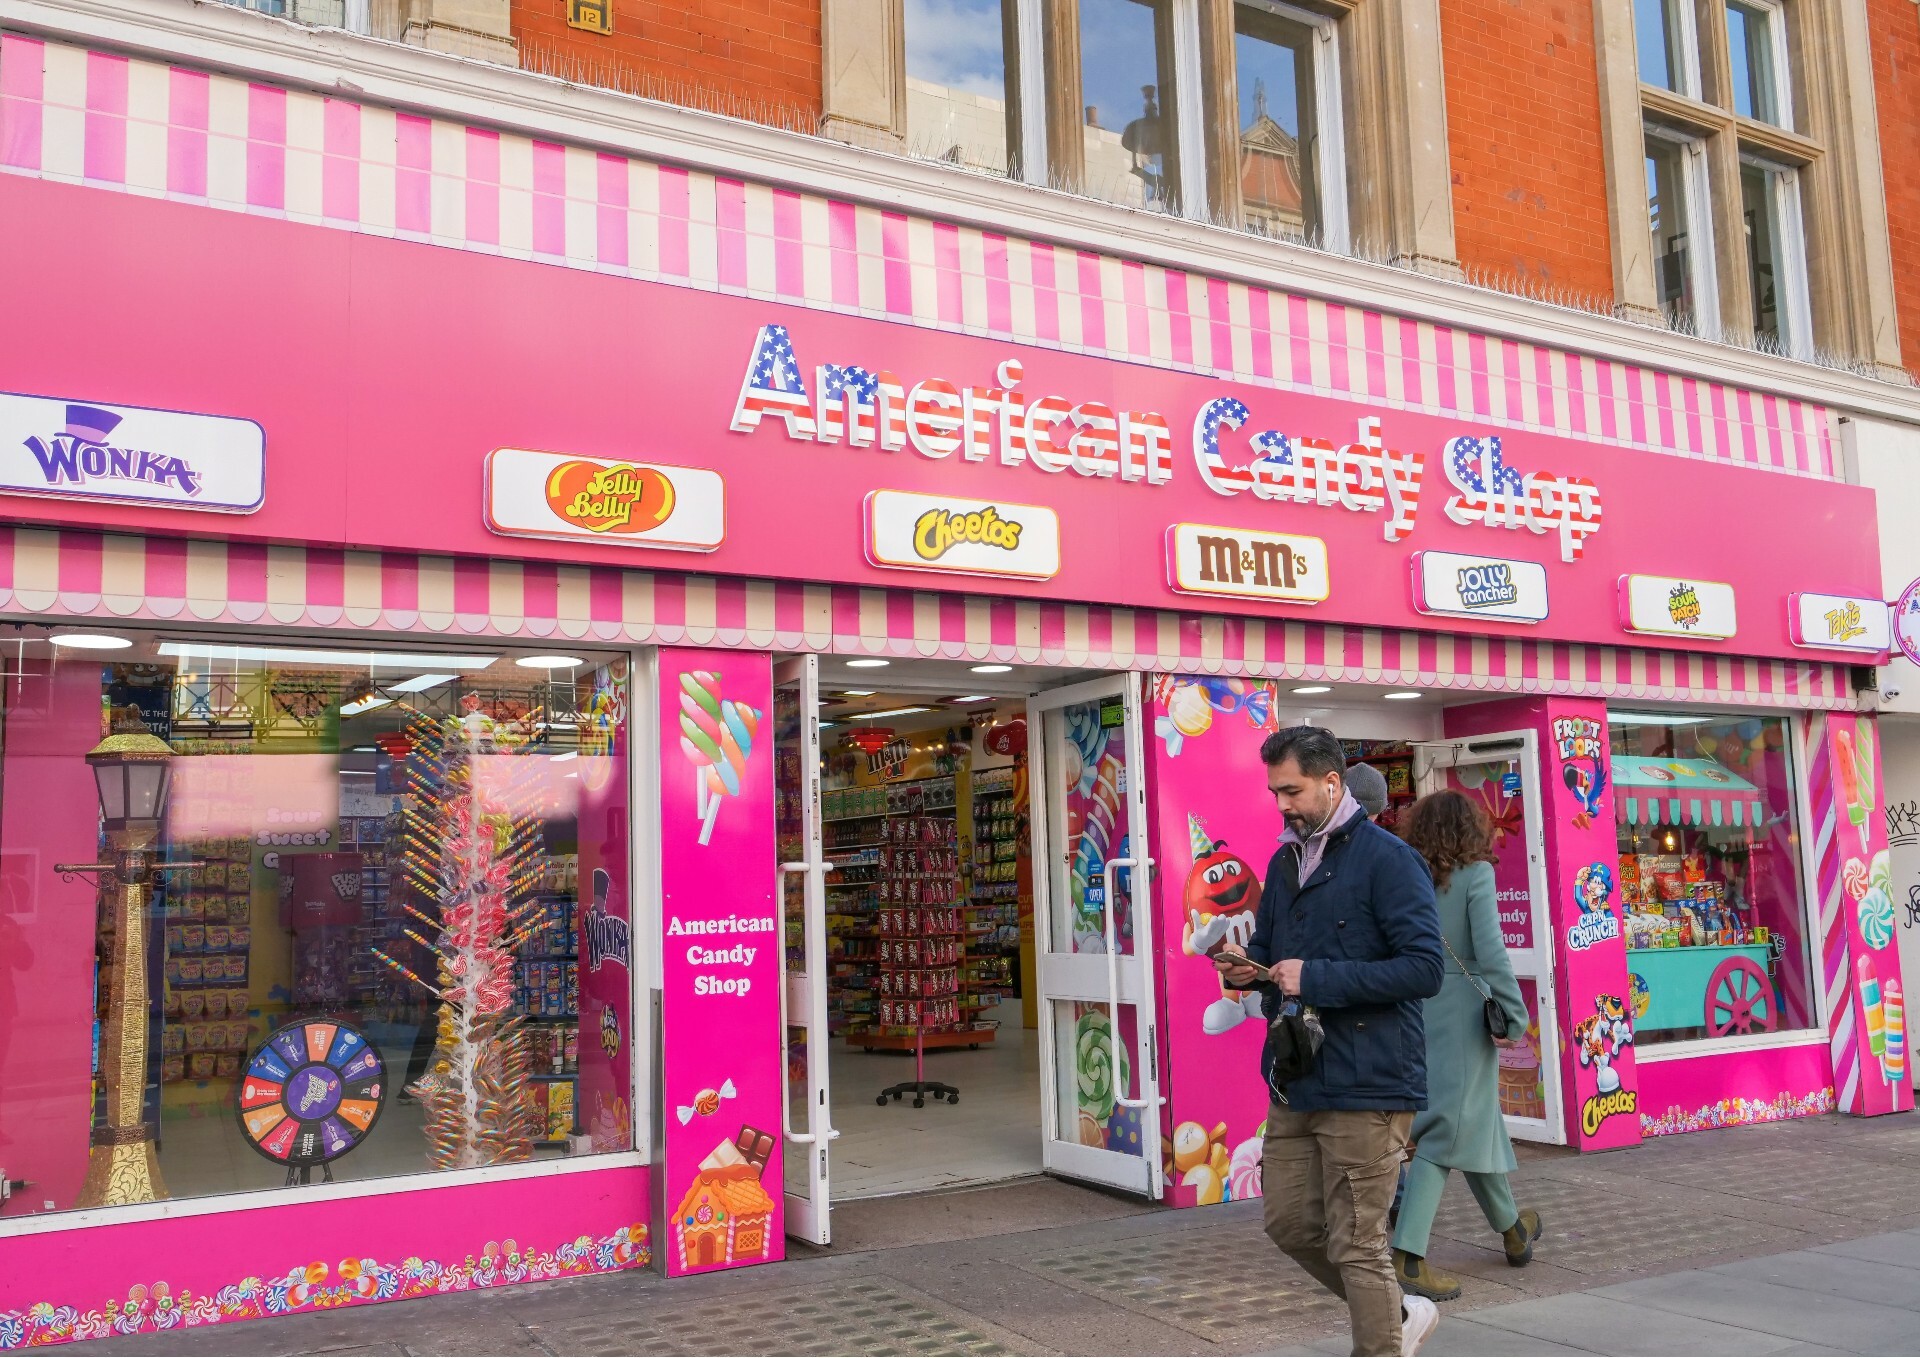 1-million-of-illegal-goods-have-been-seized-from-oxford-street-us-sweetshops